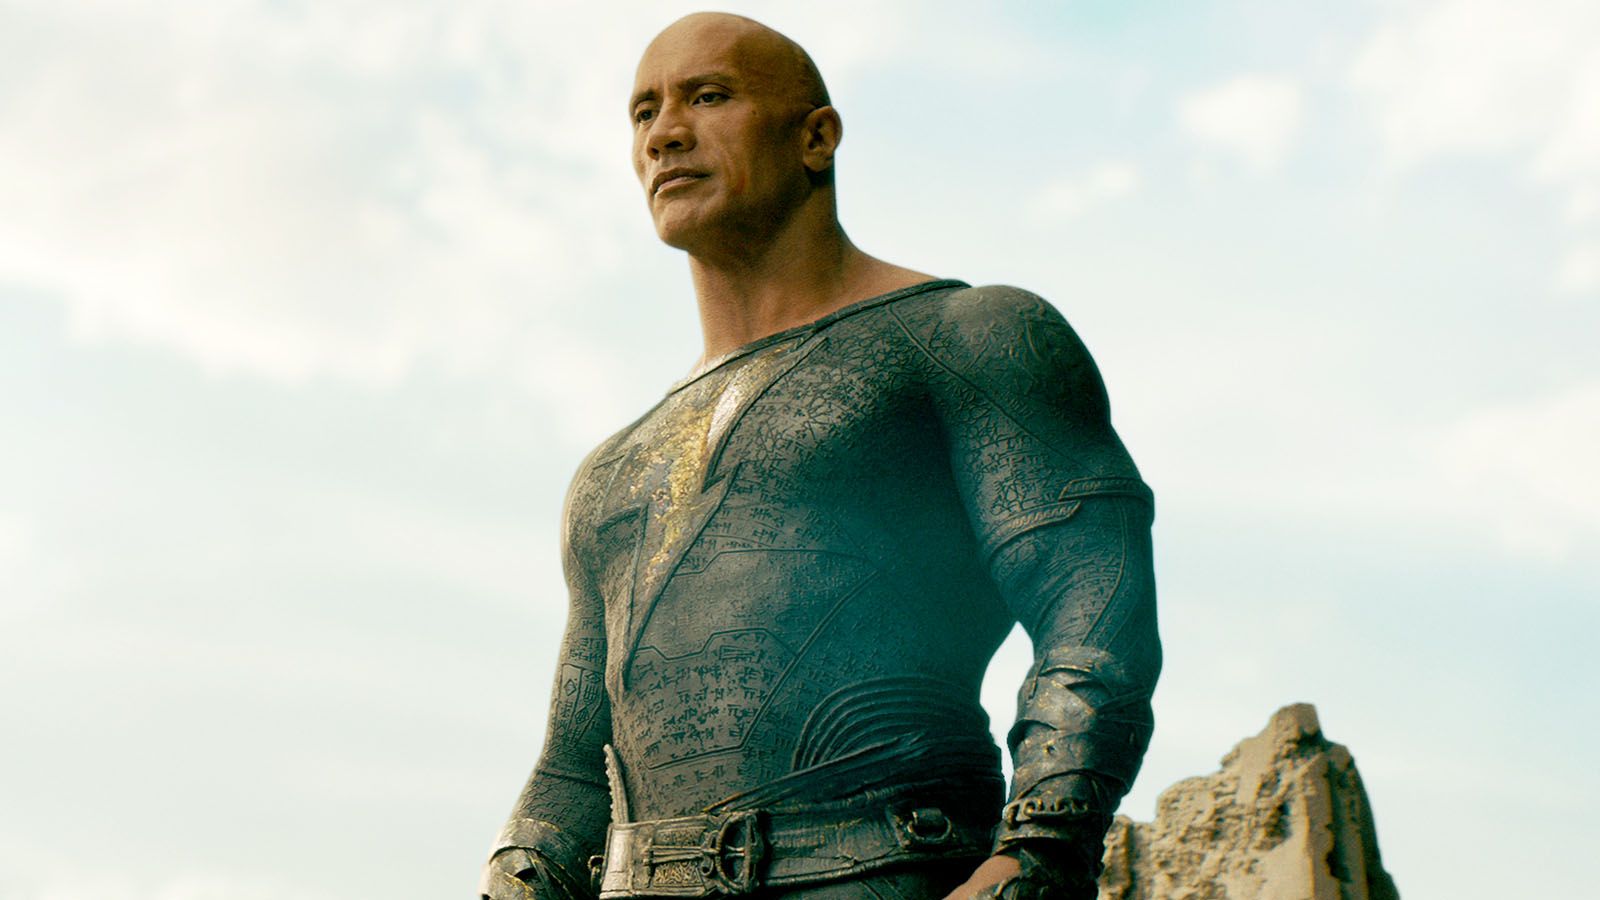 Dwayne Johnson’s charisma is muted in the DC Extended Universe’s Black Adam.